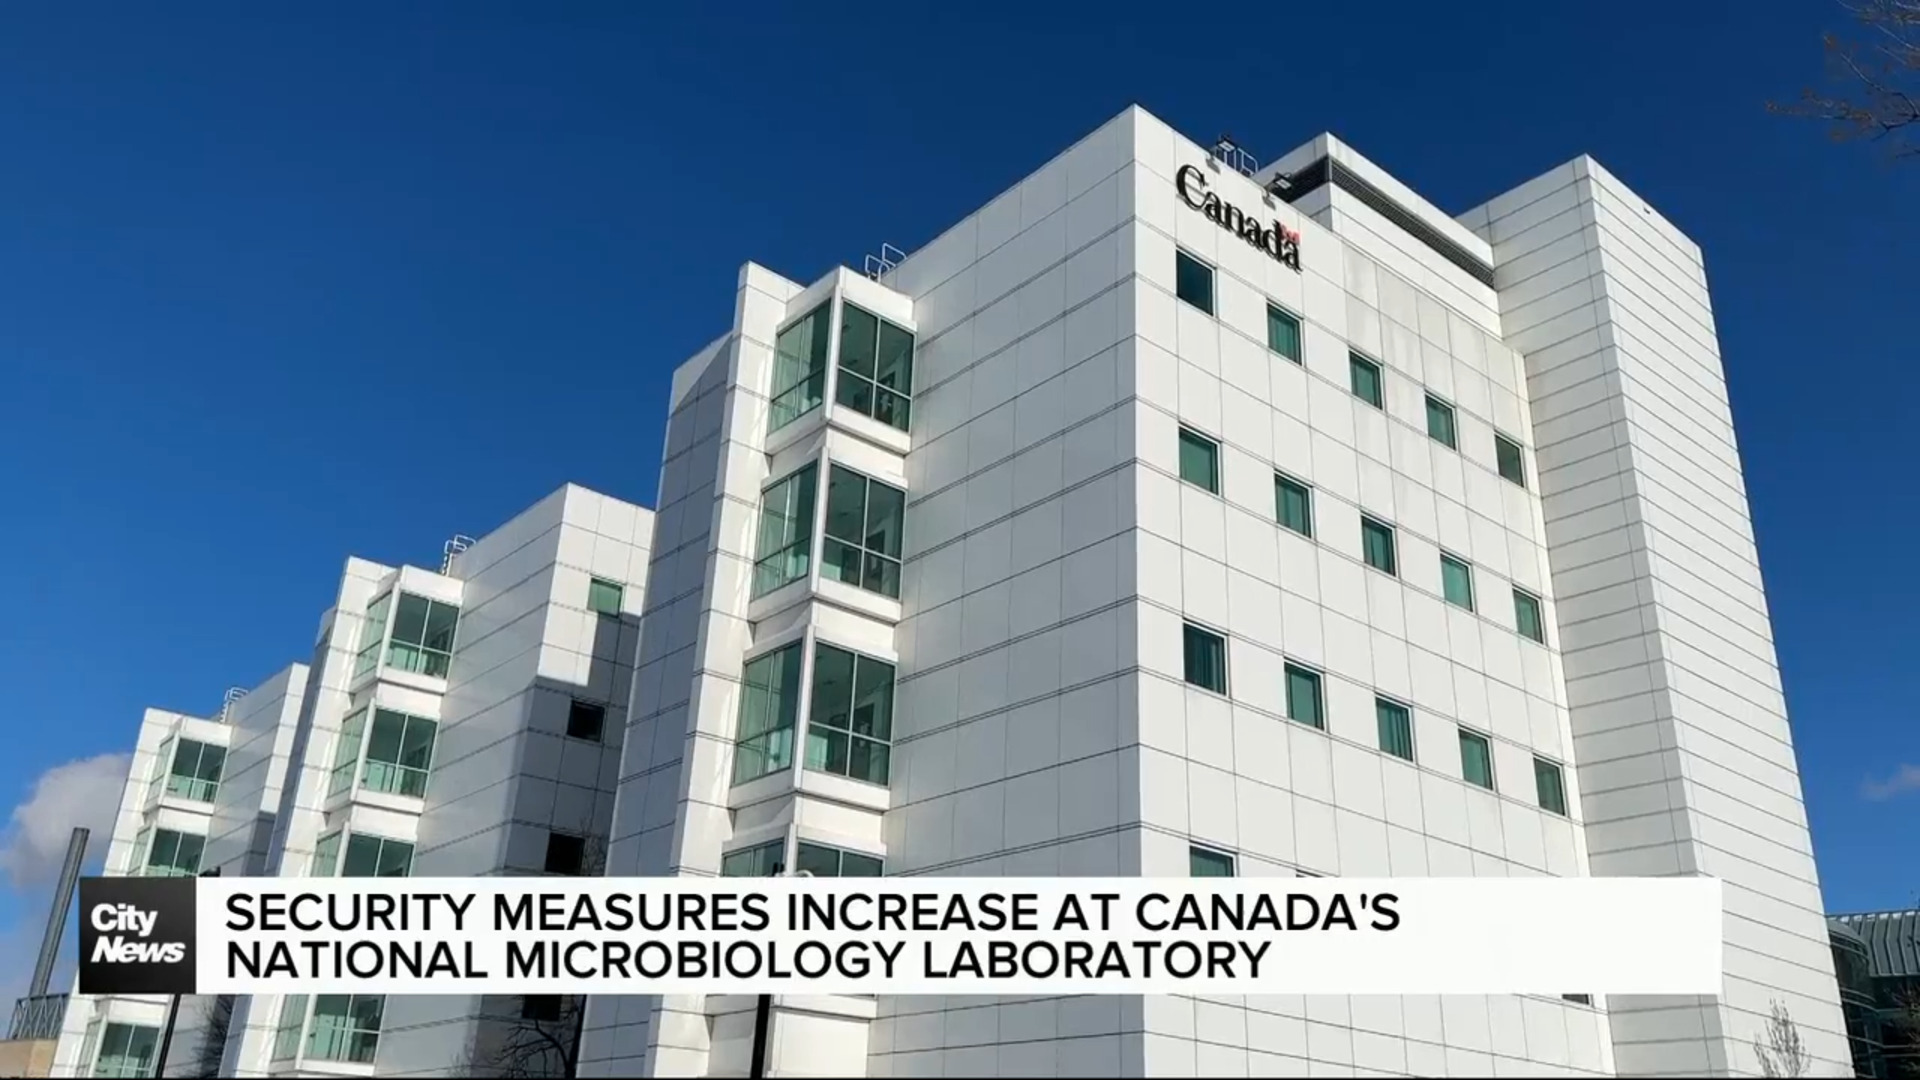 Major security changes detailed at Canada’s National Microbiology Lab